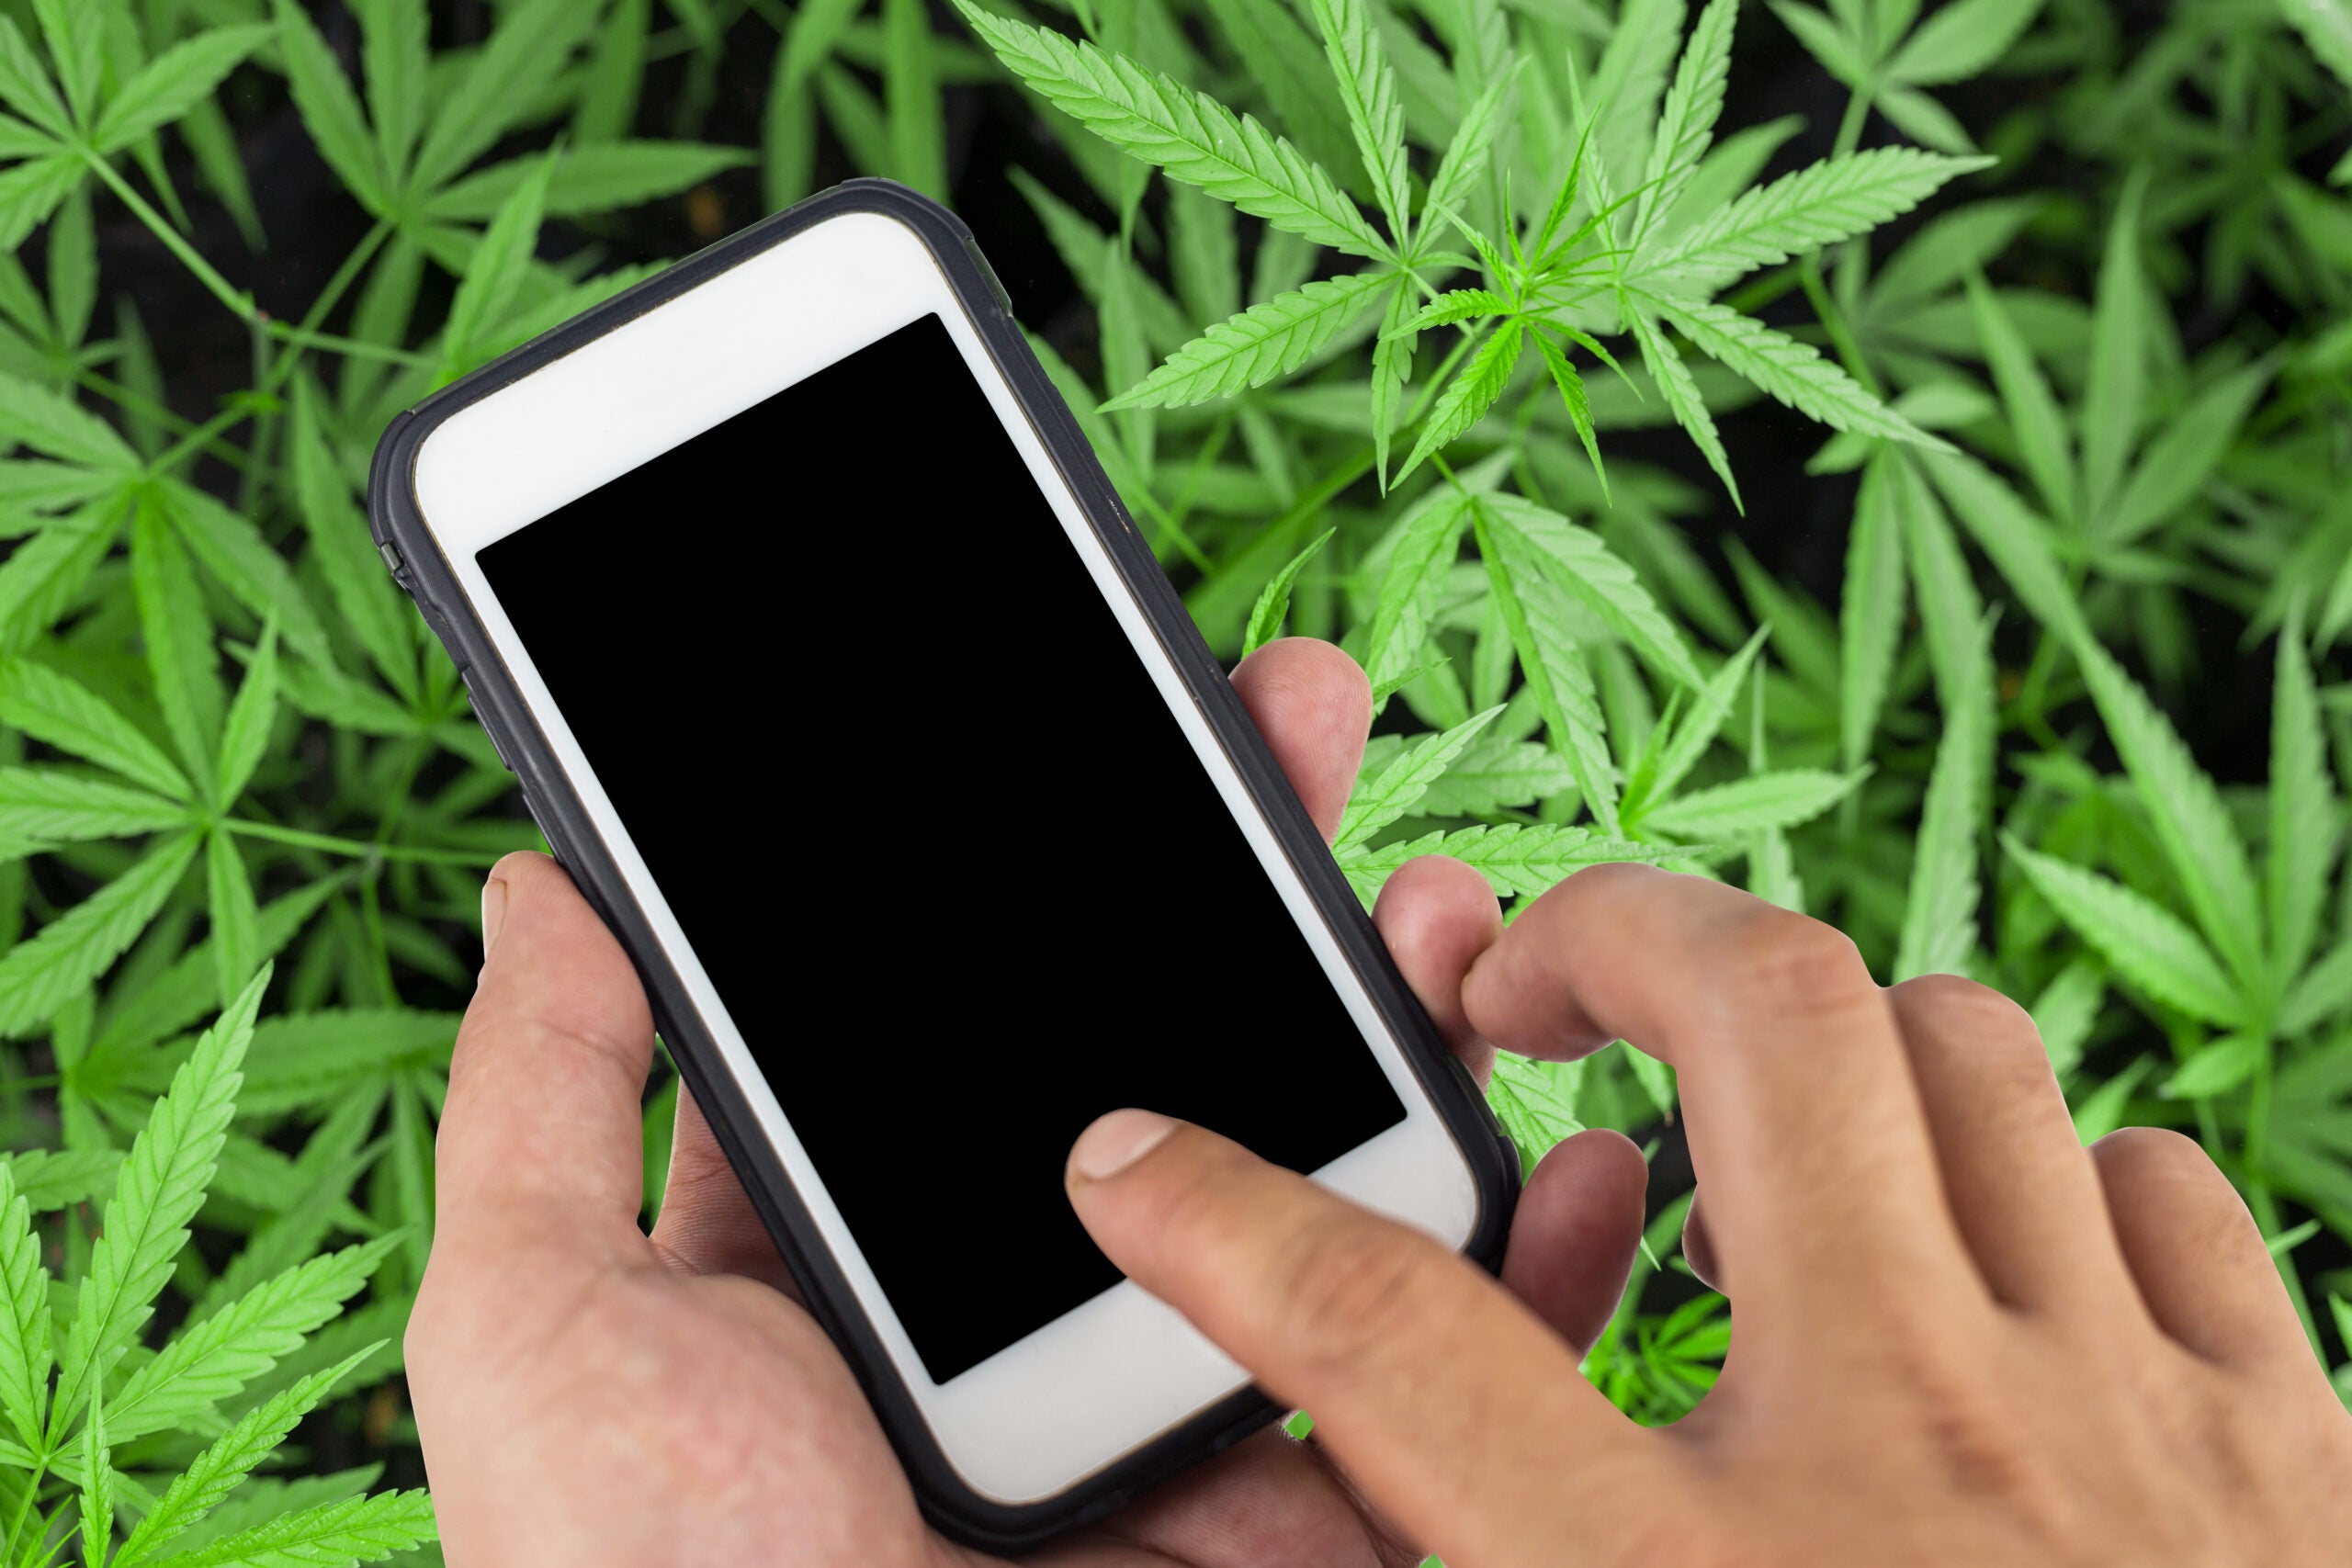 A Social Networking App For Medical Cannabis Patients Launches In Israel